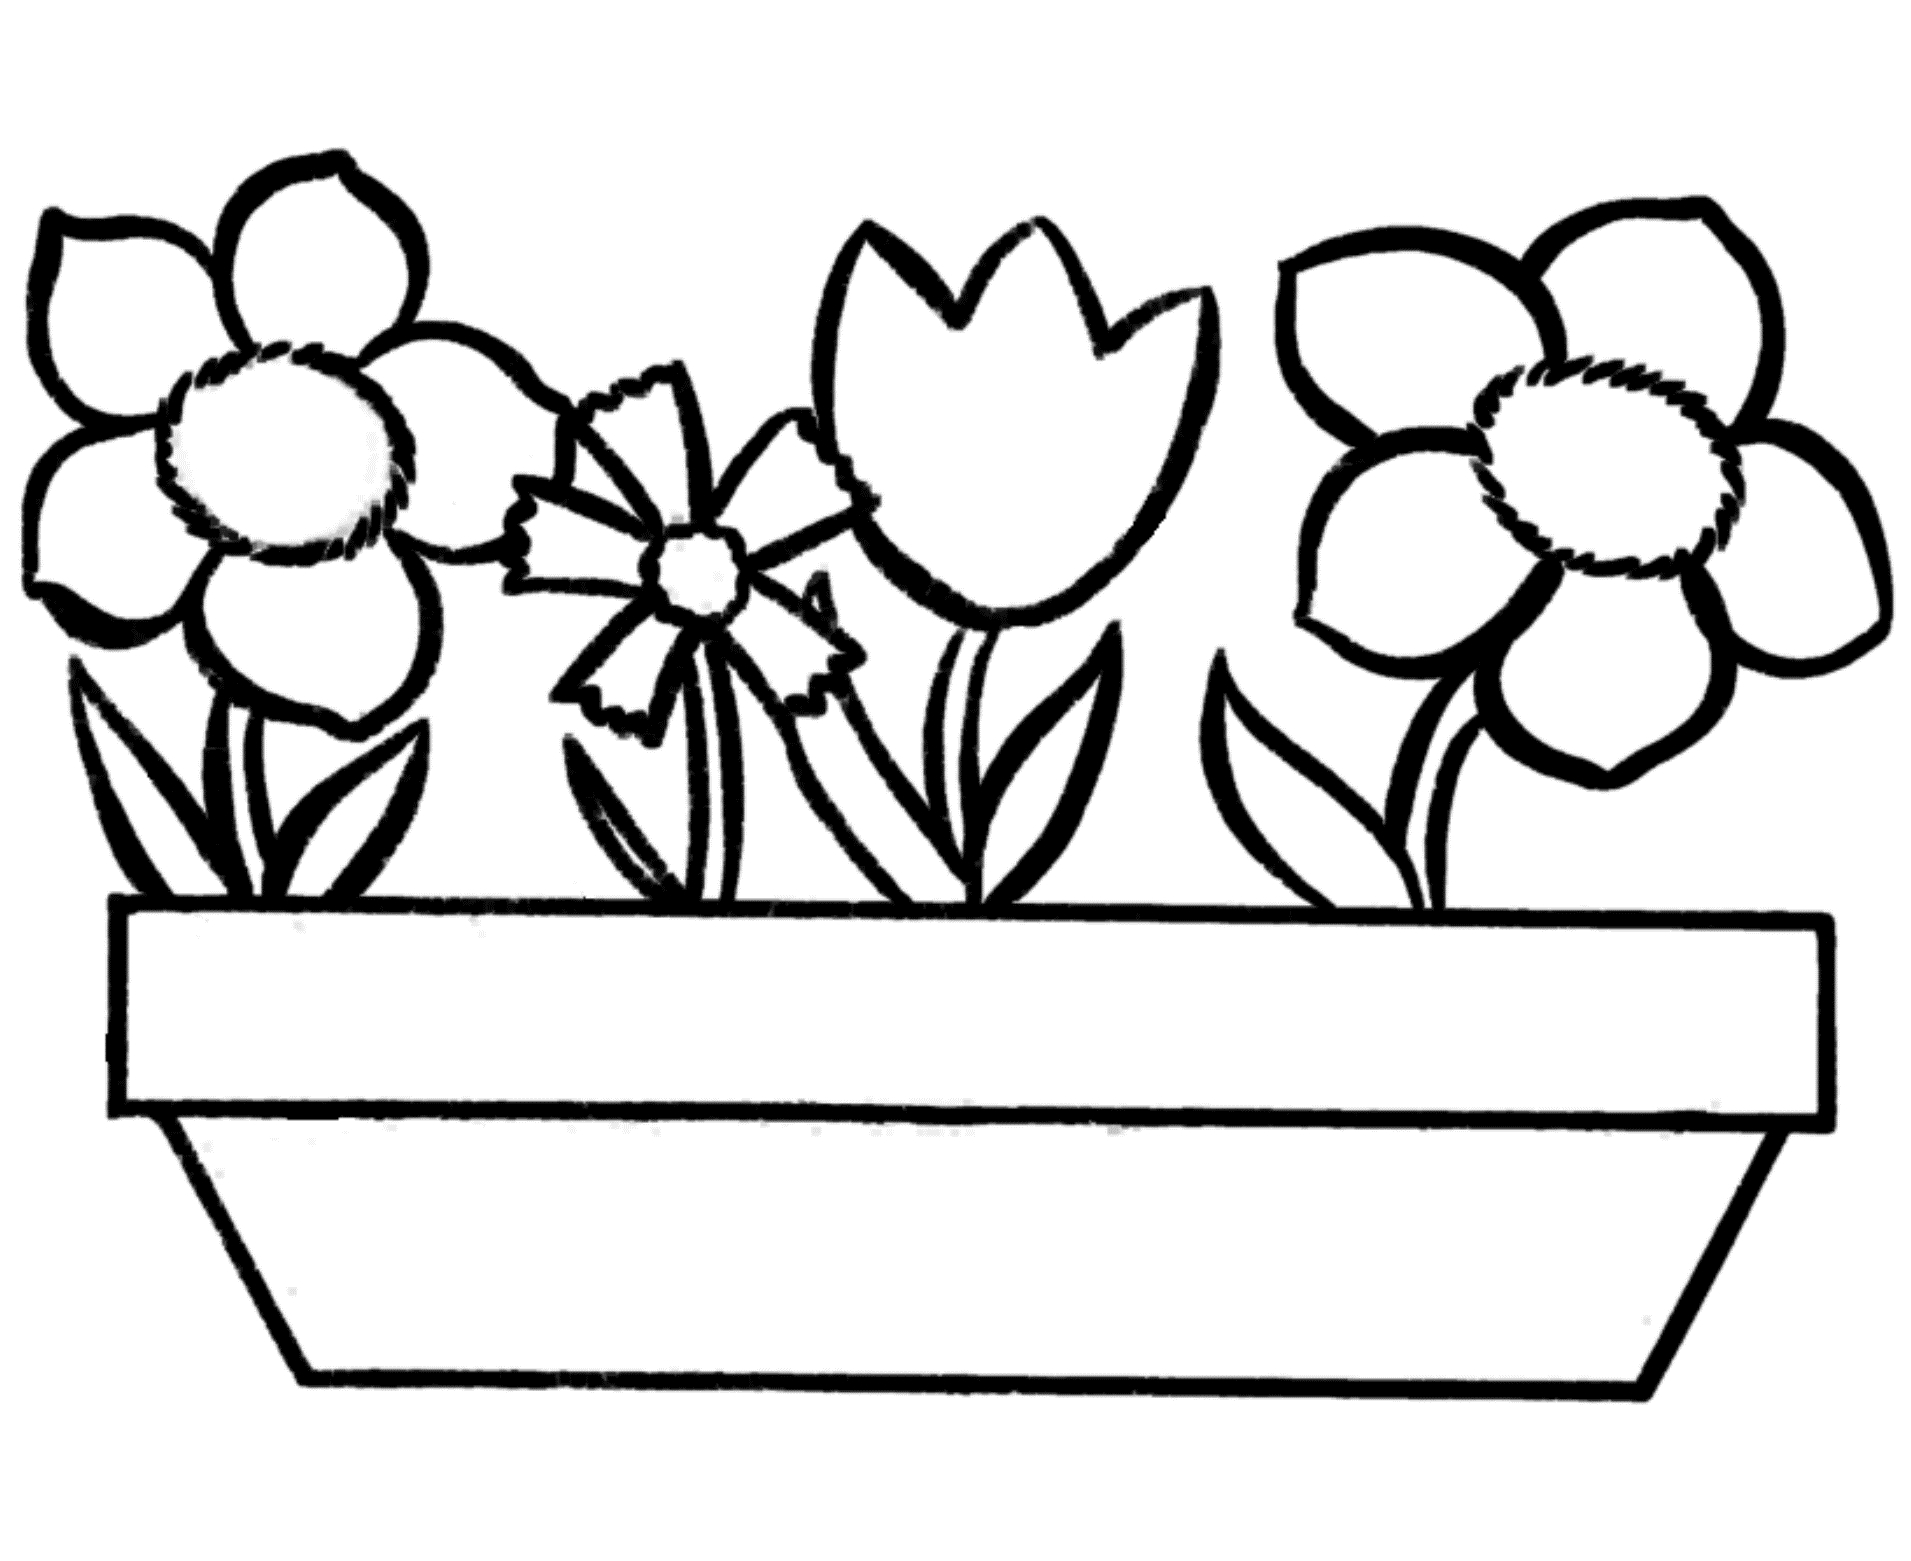 Flowers Coloring Pages Free Printable Printable Flower Coloring Pages For Girls 14 N Colouring Pages Photo